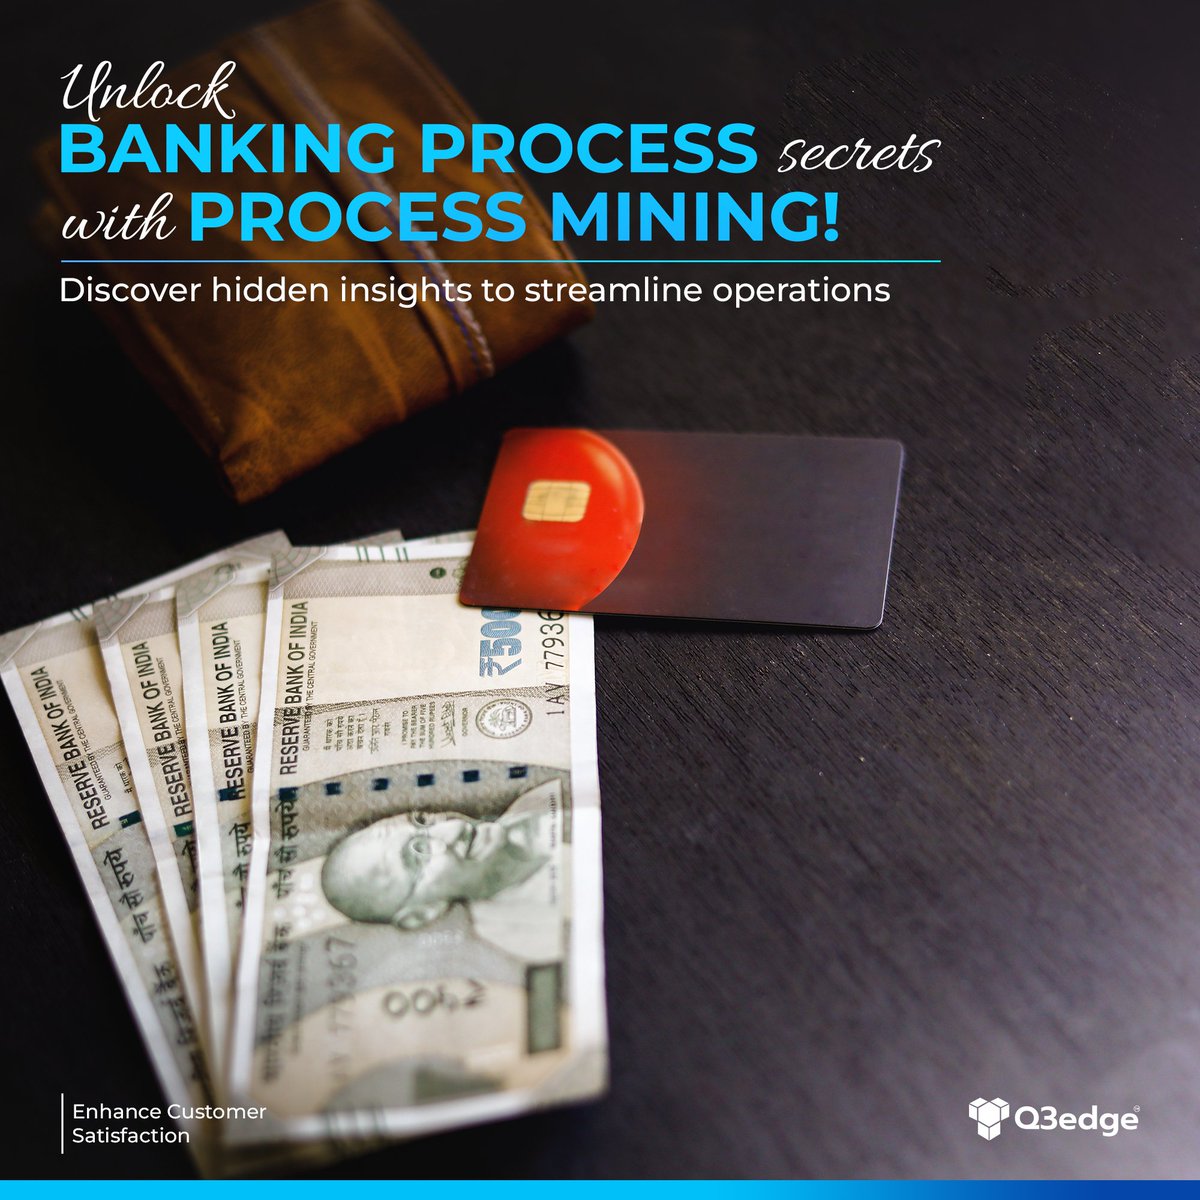 Ready to revolutionize your banking operations? Dive into the world of process mining and uncover opportunities for improvement!  
. 
. 
#Q3edge #BankingInnovation #processmaturity #processcapability #processimprovement #operationalexcellence #qualitymanagement #businessprocess